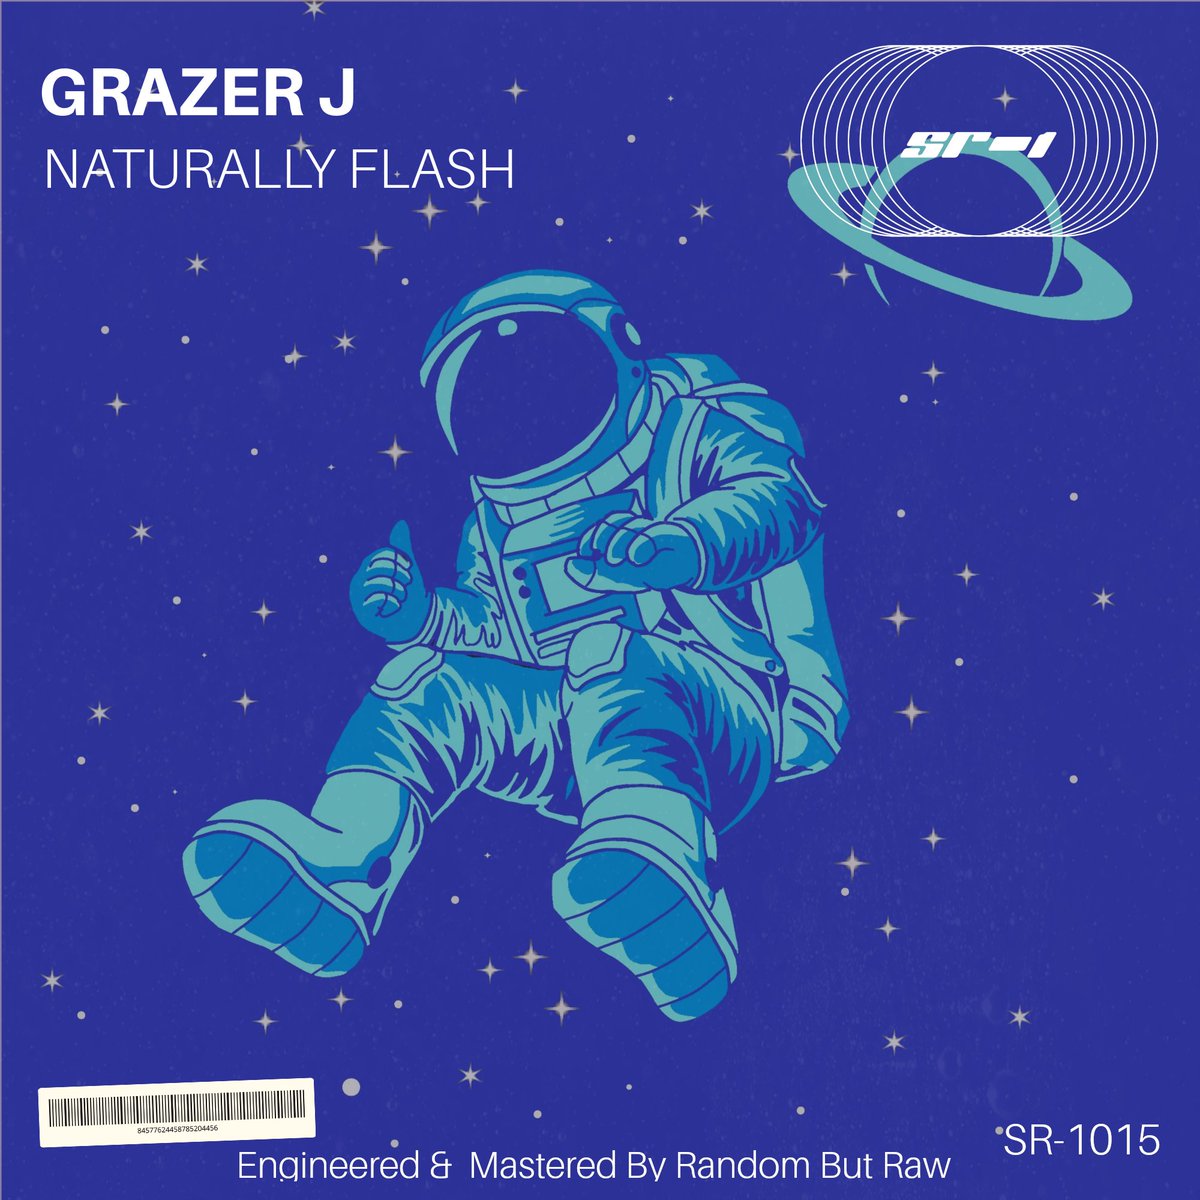 Check out the brand new SR-1 release 'Naturally Flash' from Grazer J exclusively at Toolbox Digital:

bit.ly/naturallyflash

#hardhouse #harddance #toolboxdigital #newrelease #newmusic #sr1